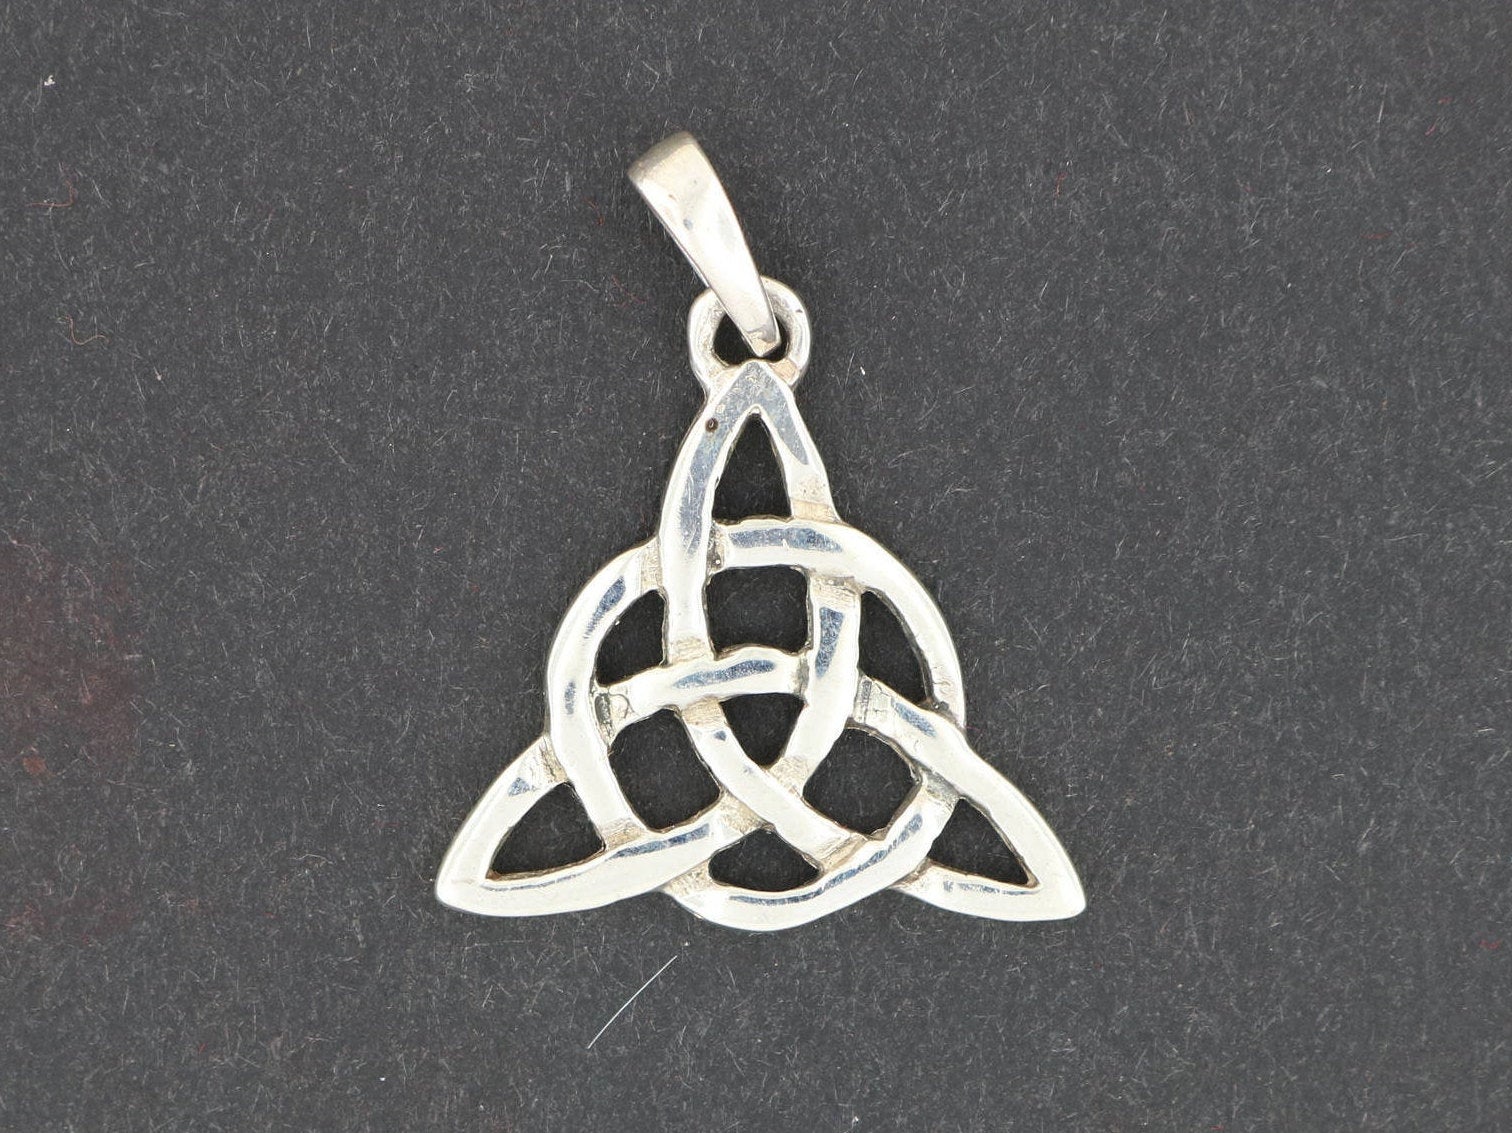 Small Triquetra Pendant in Sterling Silver or Antique Bronze, Triquetra Symbol Pendant, Sterling Silver Triquetra, Silver Triquetra Pendant, Bronze Triquetra Pendant, Antique Bronze Triquetra, Charmed Movie Pendant, Silver Celtic Pendant, Bronze Celtic Pendant, Trinity Knot Charm, Endless Knot Pendant, Irish Celtic Pendant, Silver Trinity Pendant, Bronze Trinity Pendant, Silver Celtic Jewelry, Silver Celtic Jewellery, Bronze Celtic Jewelry, Bronze Celtic Jewellery